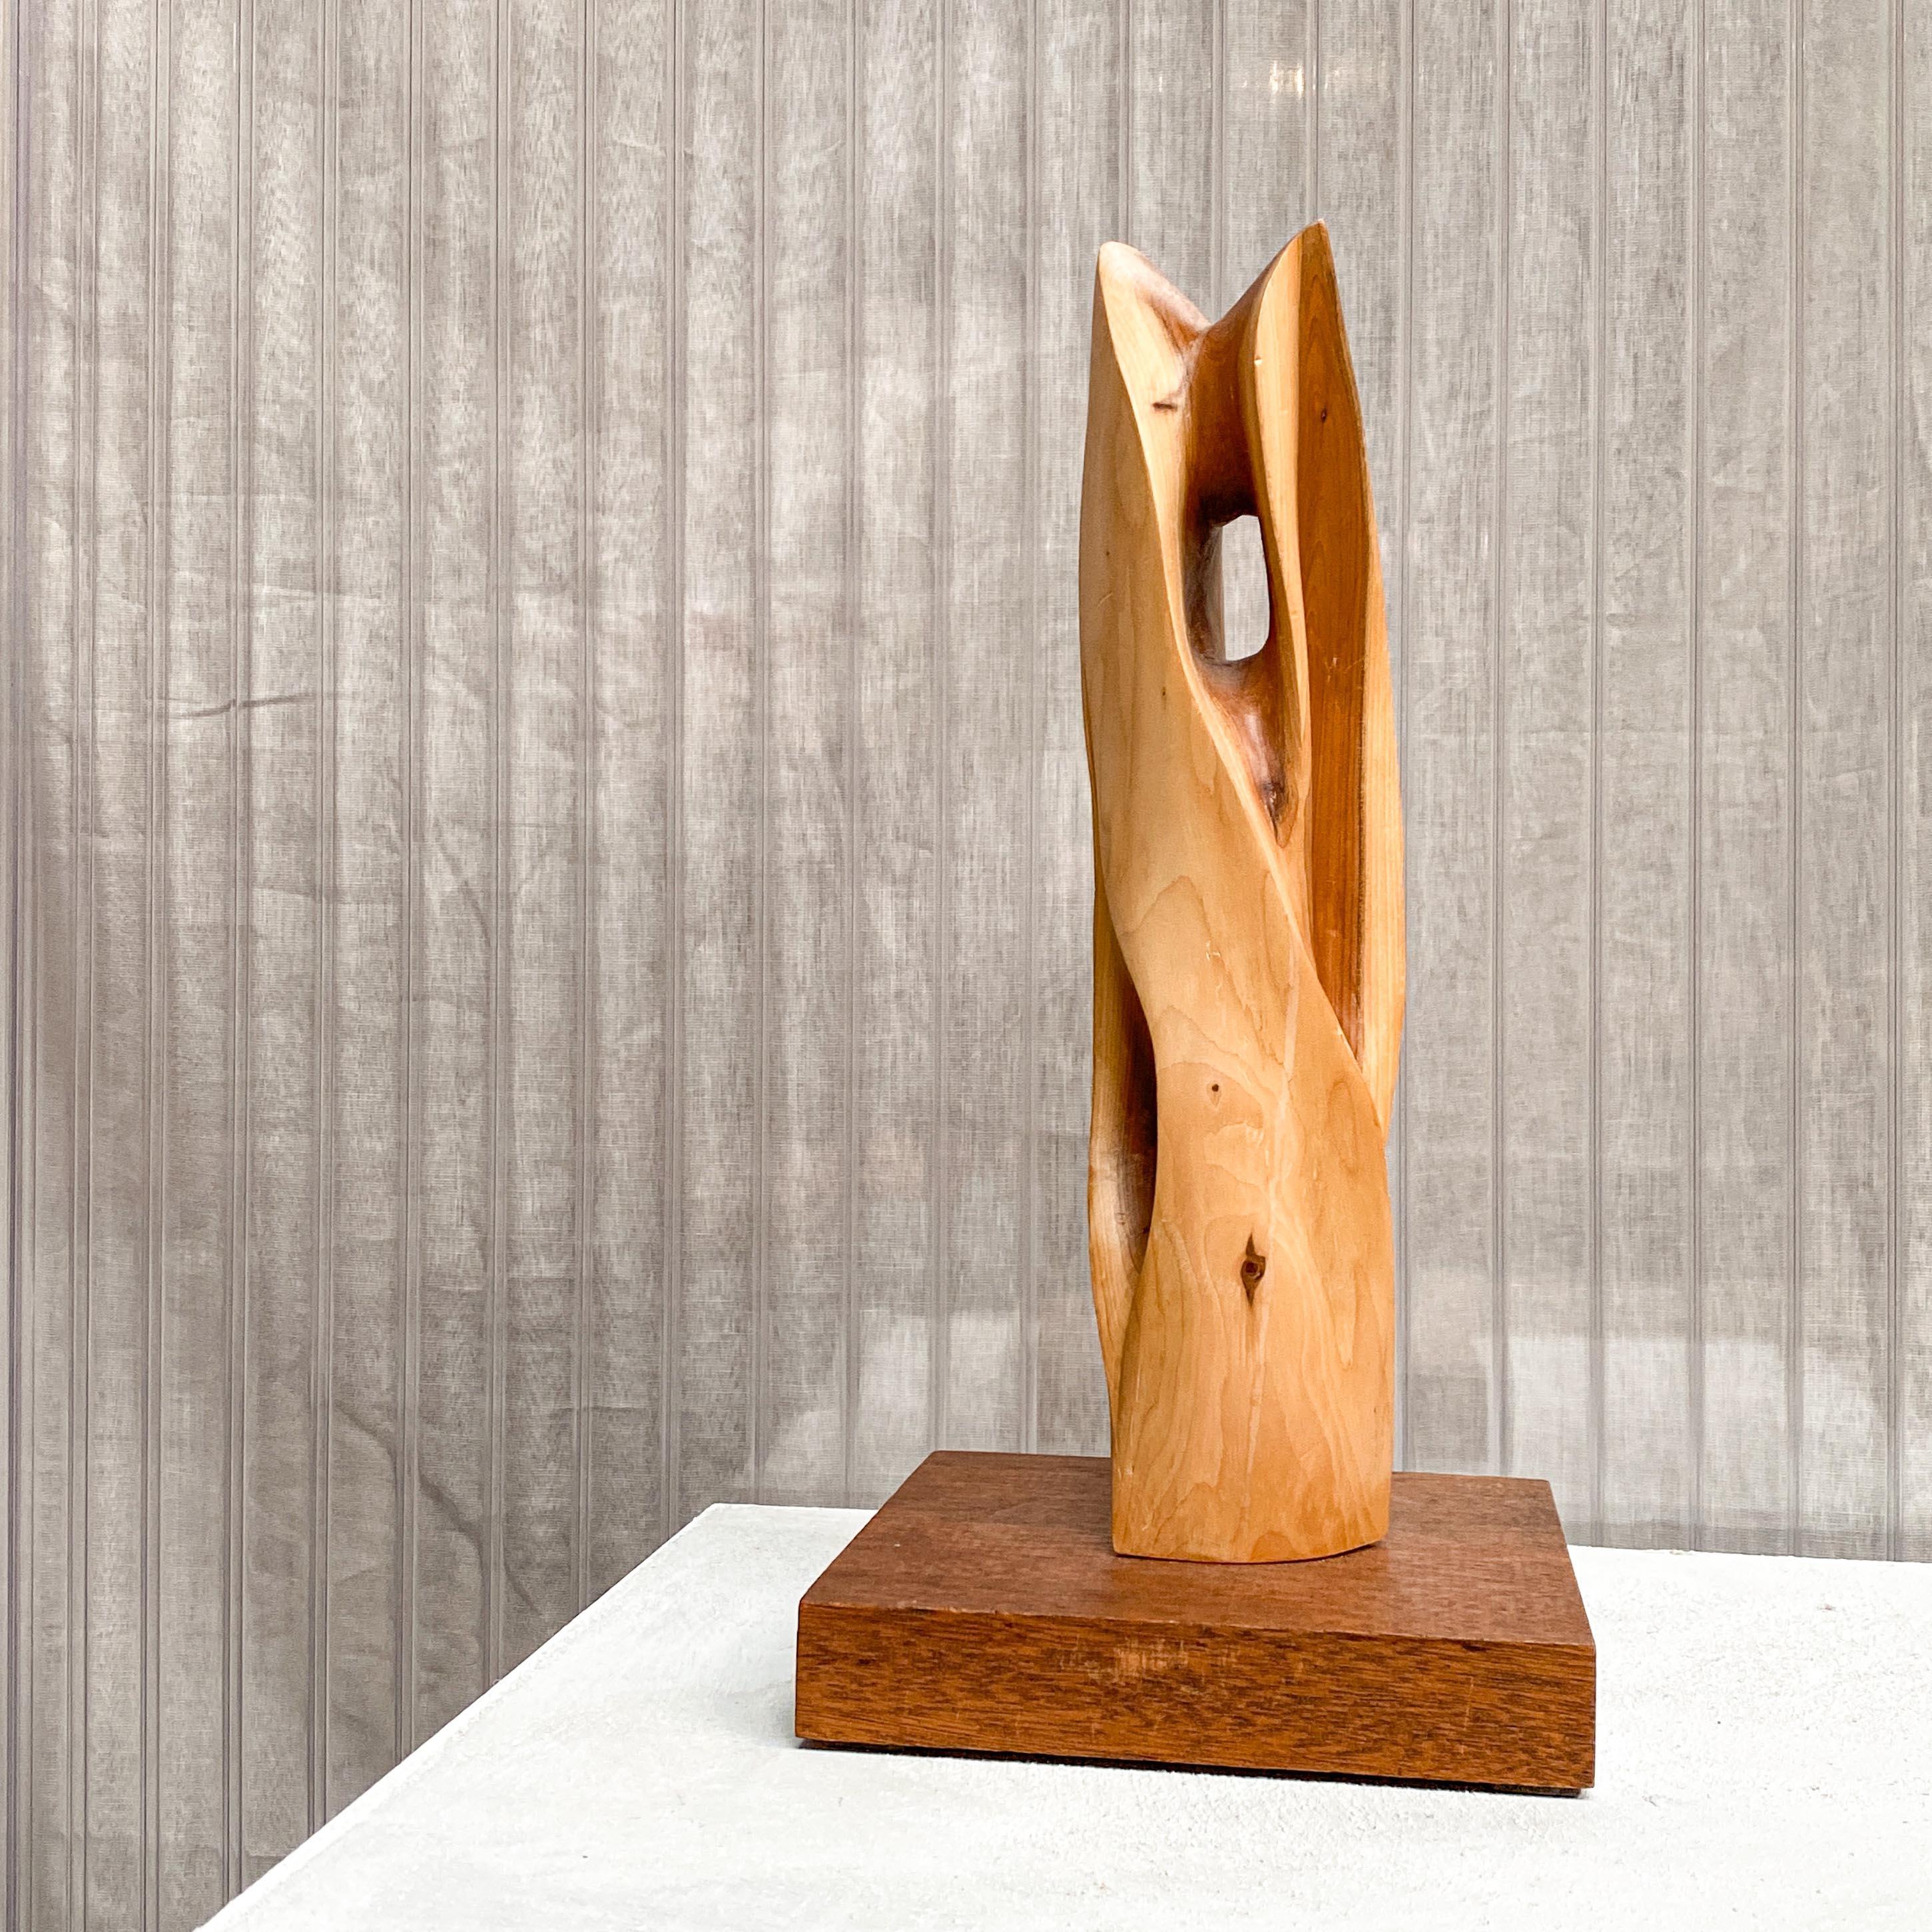 Mid-Century Modern Modernist Wooden Sculpture in Abstract Intricate TOTEM Shape on a Wooden Base For Sale